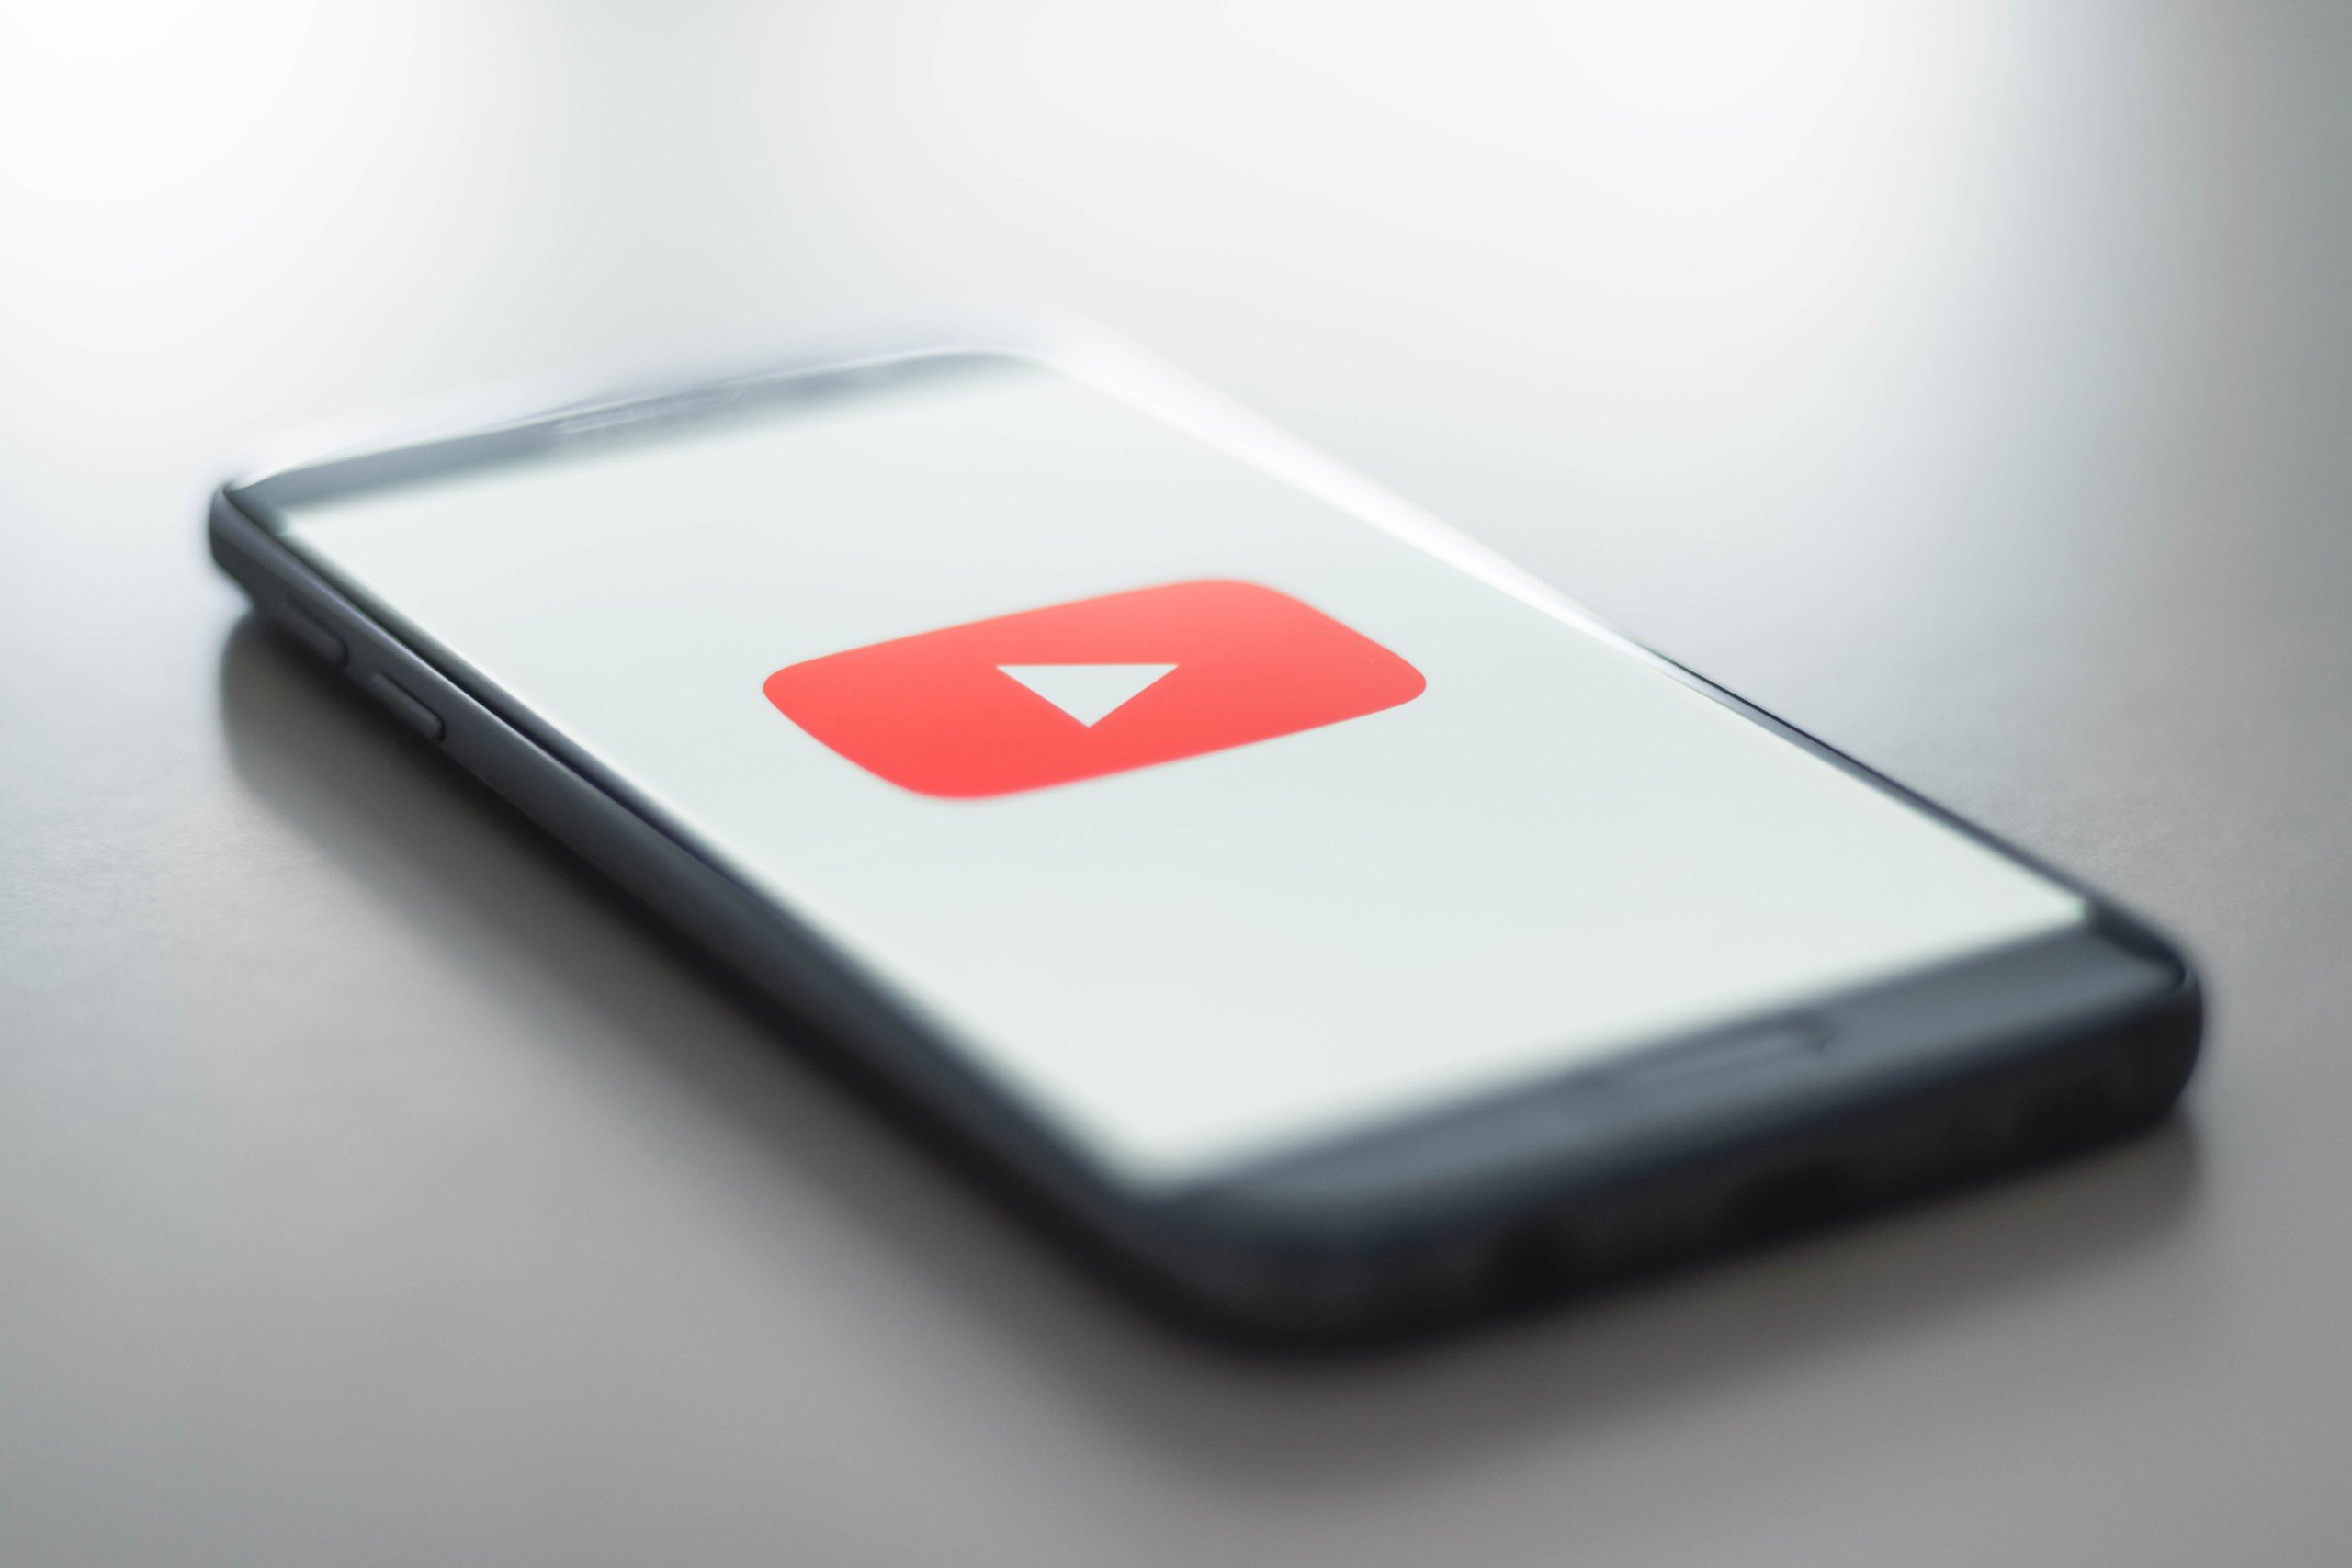 YouTube improves the video quality options on its app